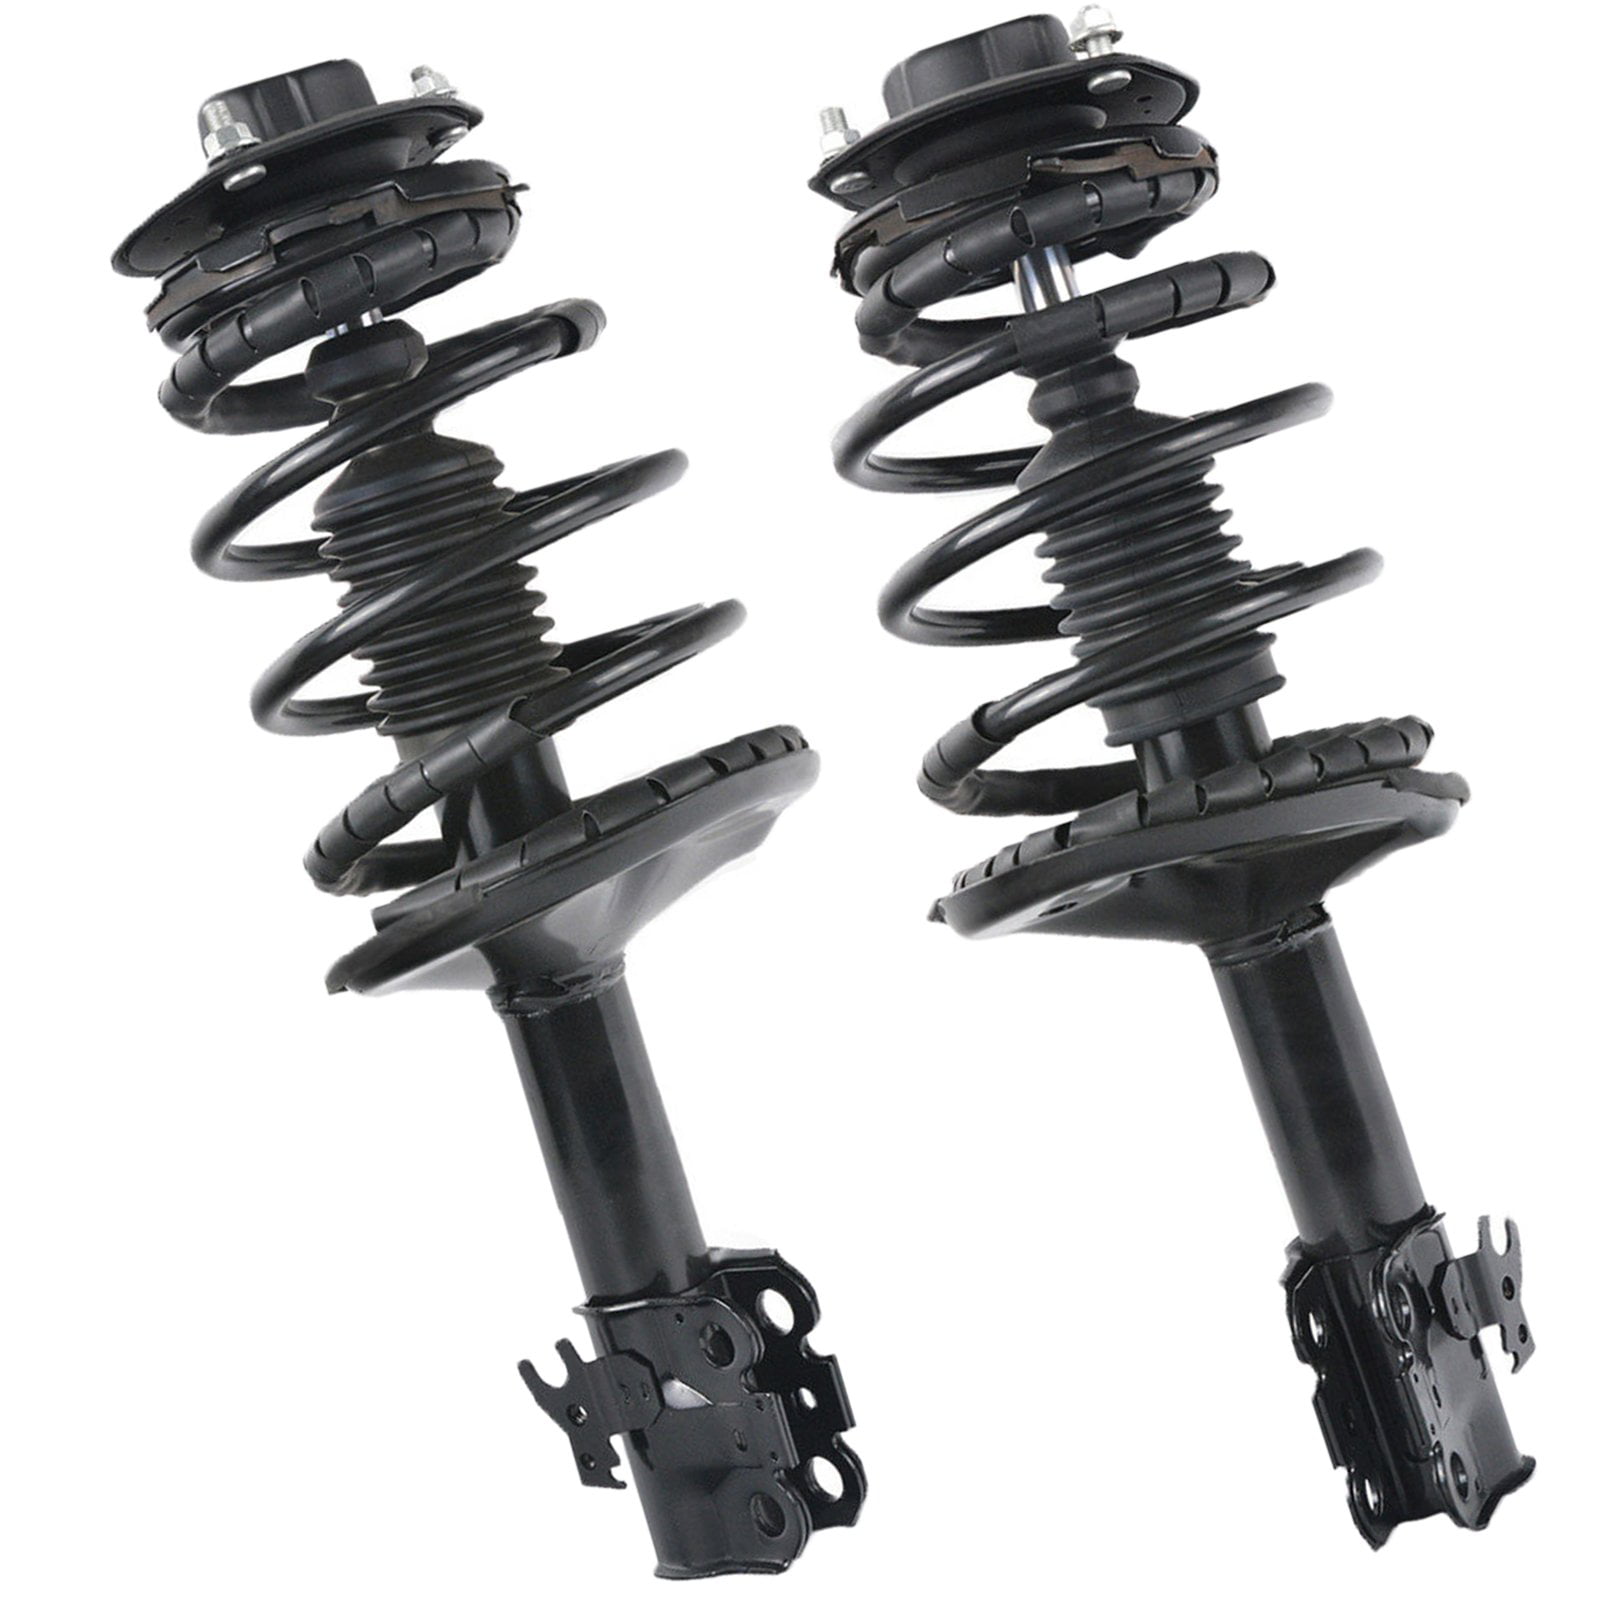 171980,171979 Struts Full set of 2 SAA036 Camry Complete Front Quick Shock and Struts with Coil Spring Assembly KAX Front Struts Fit For Camry 1992 1993 1994 1995 1996 